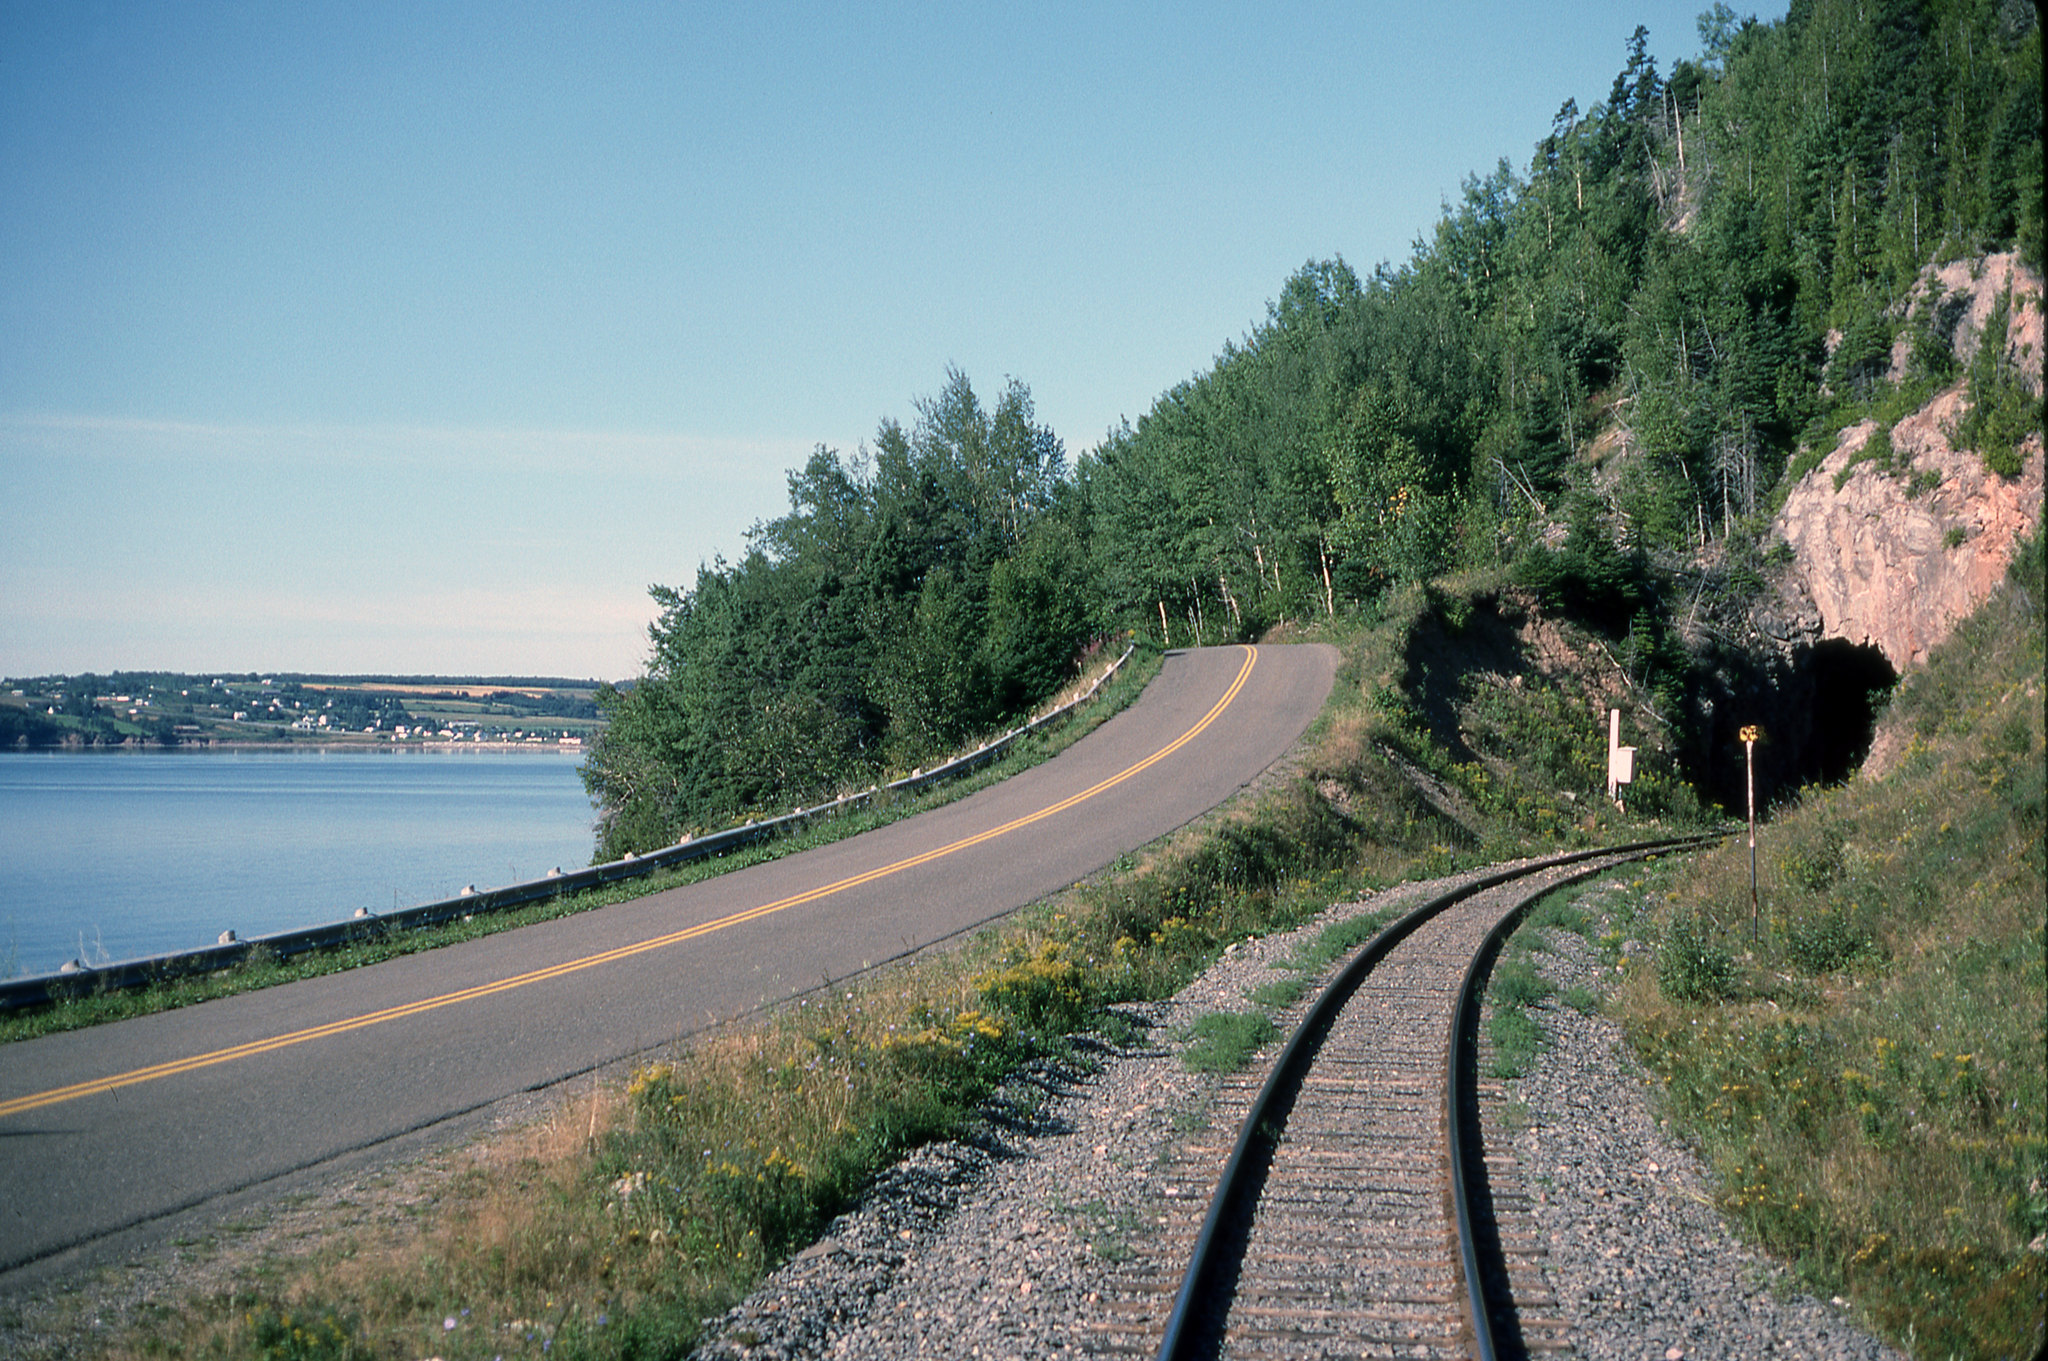 Tunnel just east of Port-Daniel on CN's Gaspé line. 

I took this photo from the rear coach of VIA # 16 "Chaleur" in August 1989. At this time # 16 was combined with # 14 "Ocean" from Montreal to Matapedia. At Matapedia the two trains were split before continuing to their respective destinations, the Ocean to Moncton and the Chaleur to Gaspé. After the infamous cuts of January 1990 the two trains ran on alternate days from Montreal to their respective destinations, six days a week.

Port-Daniel, Quebec
Tuesday, August 8, 1989

